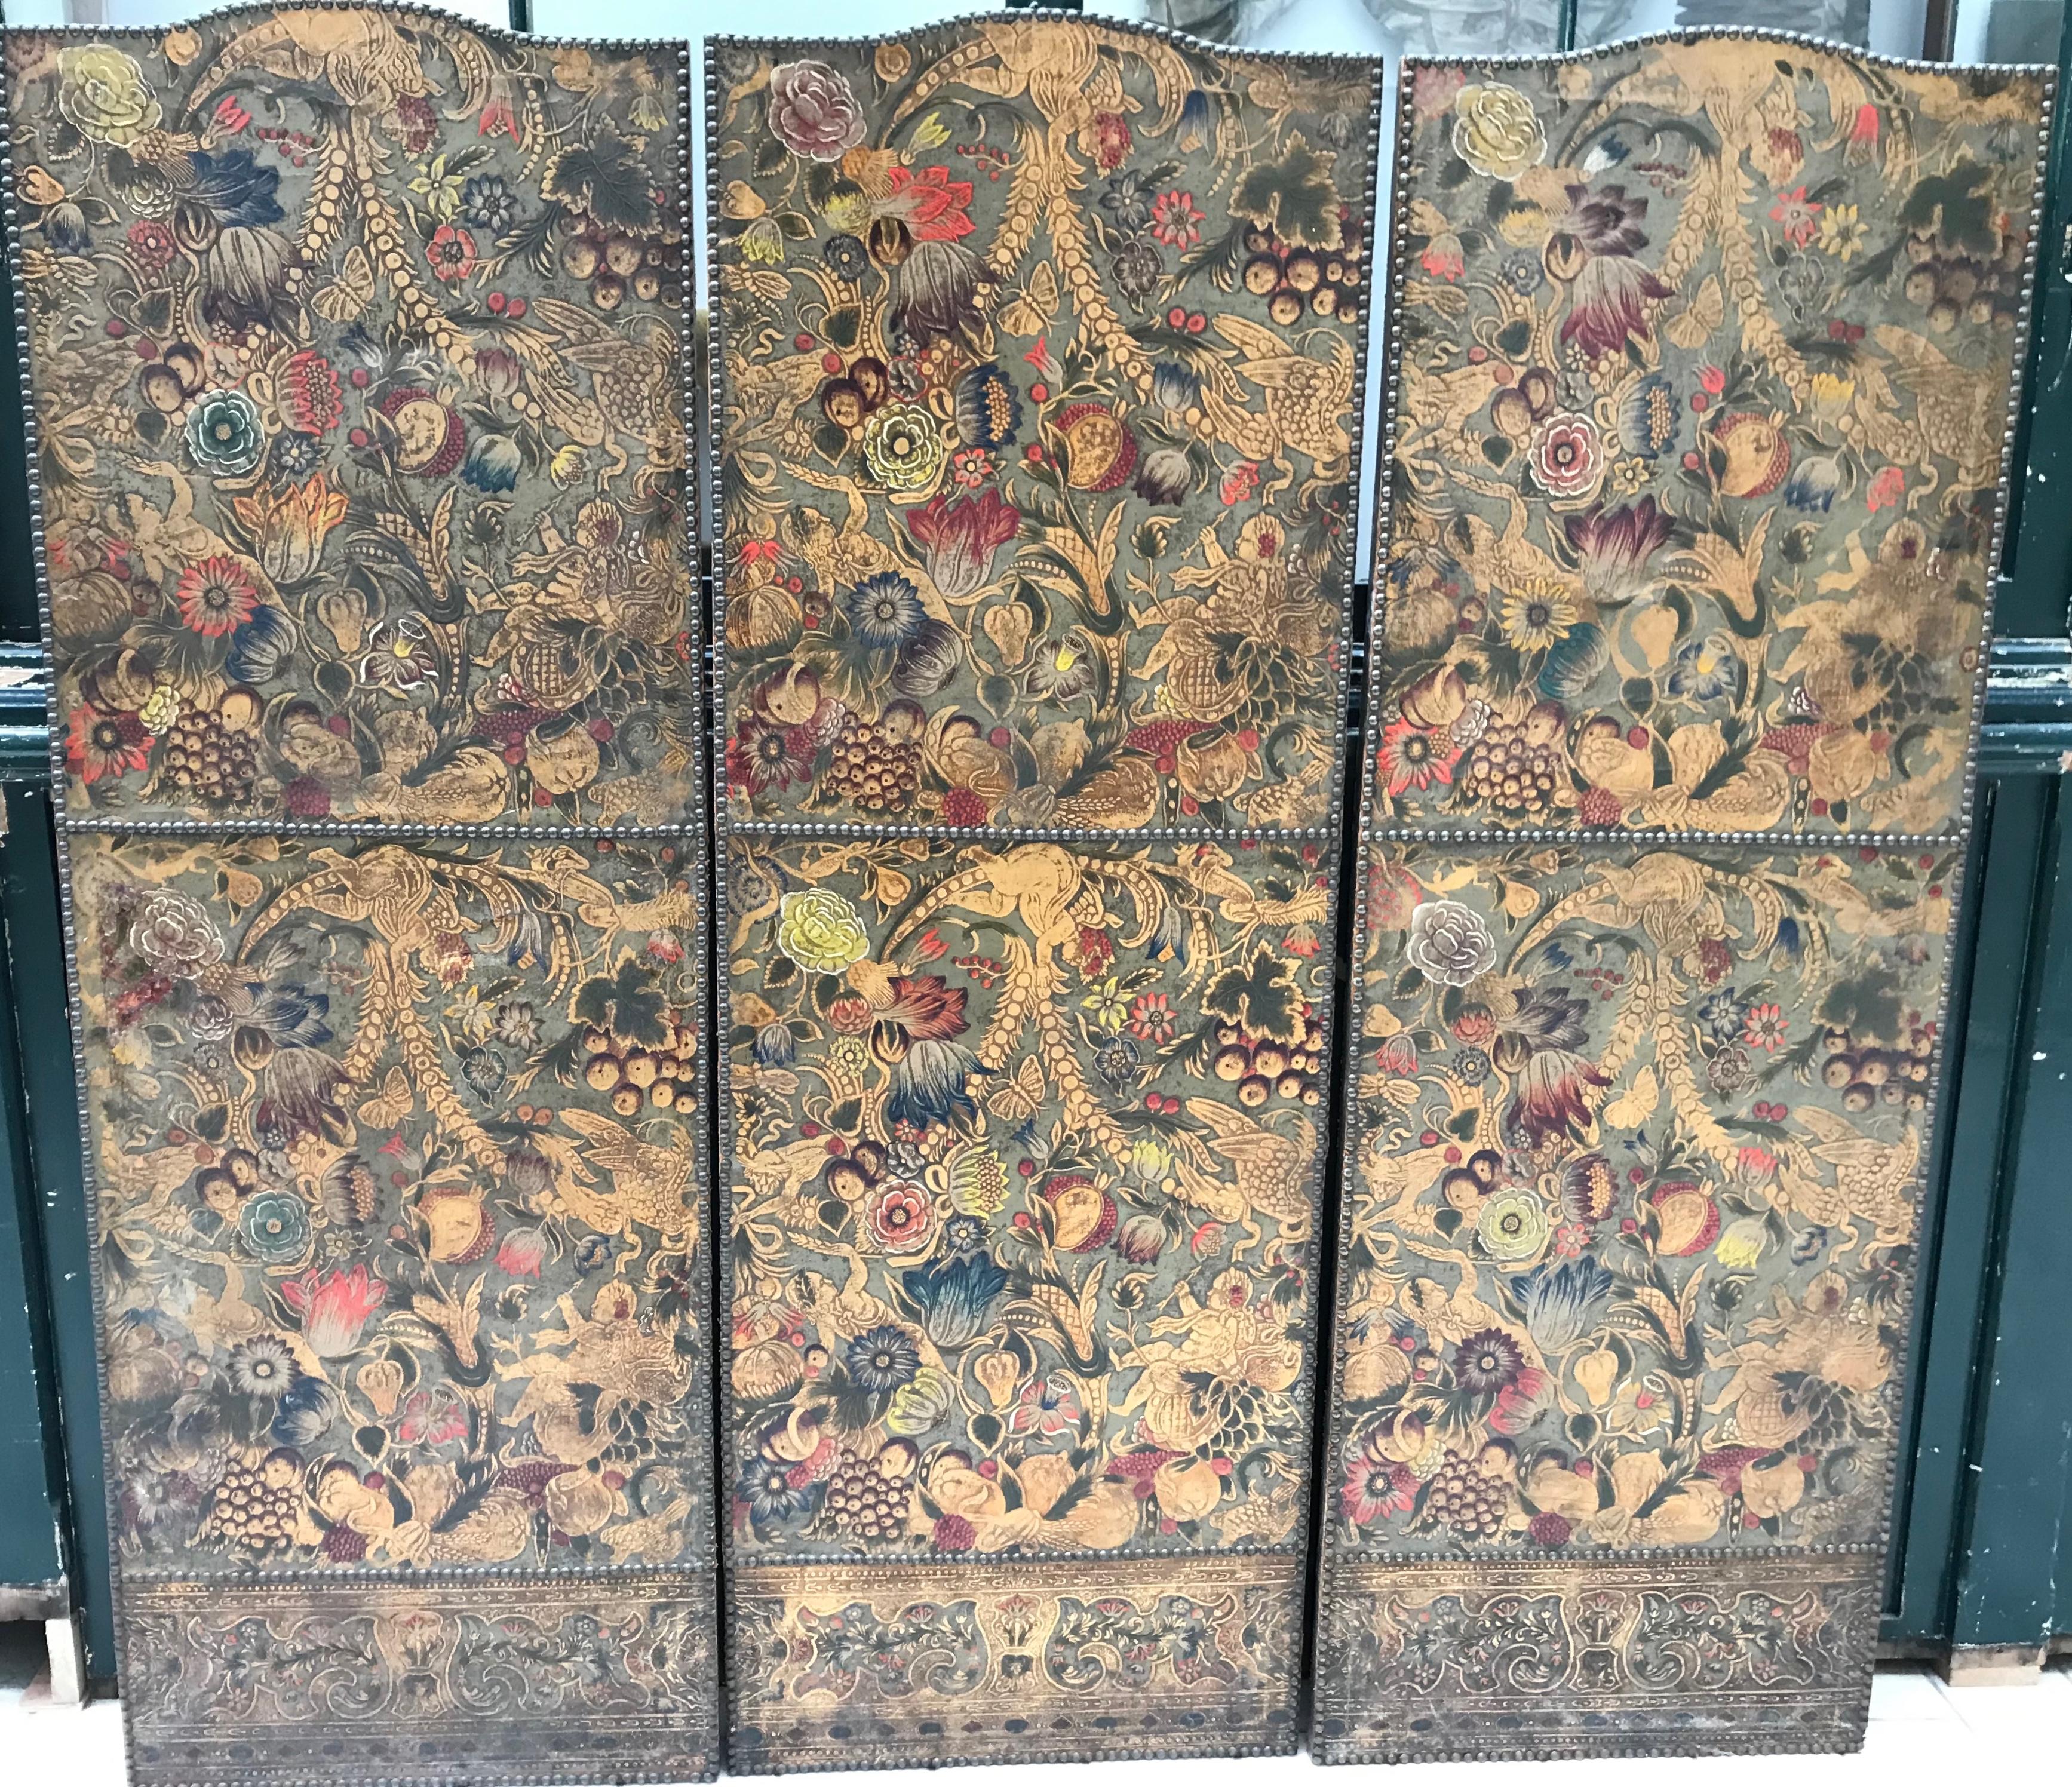 Three sensational 18th century Dutch panels painted on hand woven linen in blue and white on a rich gold background.
On the reverse the panels retain the original embossed and hand painted cordovan leather with monkeys and putti figures frolicking